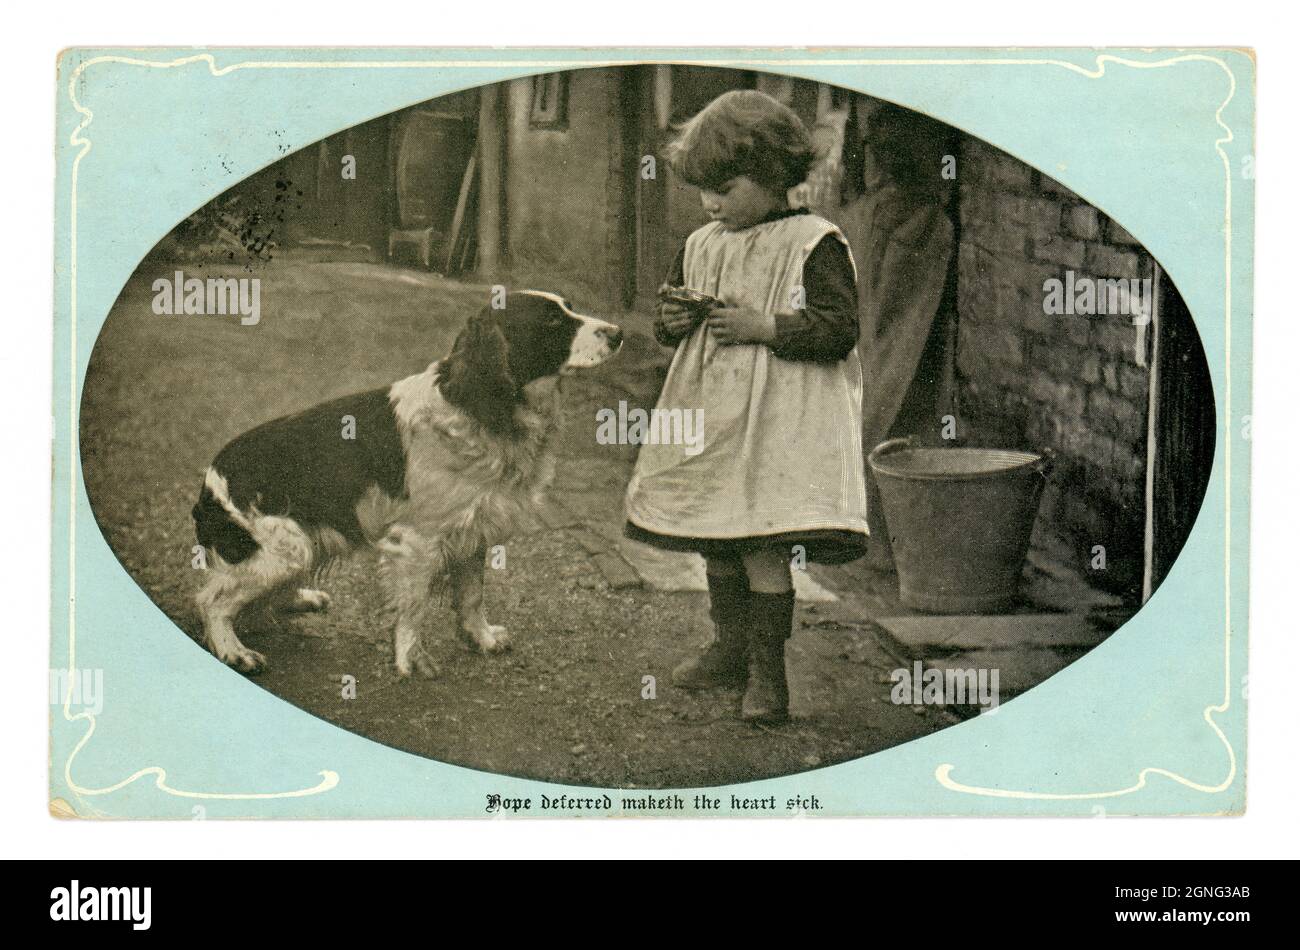 Original sentimental Edwardian greetings real photographic postcard, of a young Edwardian / Victorian girl in a farmyard wearing a pinafore feeding scraps to a waiting springer spaniel  - 'Hope deferred maketh the heart sick' is the inscription. posted April 1904, Published by Marcus Ward & Co. U.K. Stock Photo